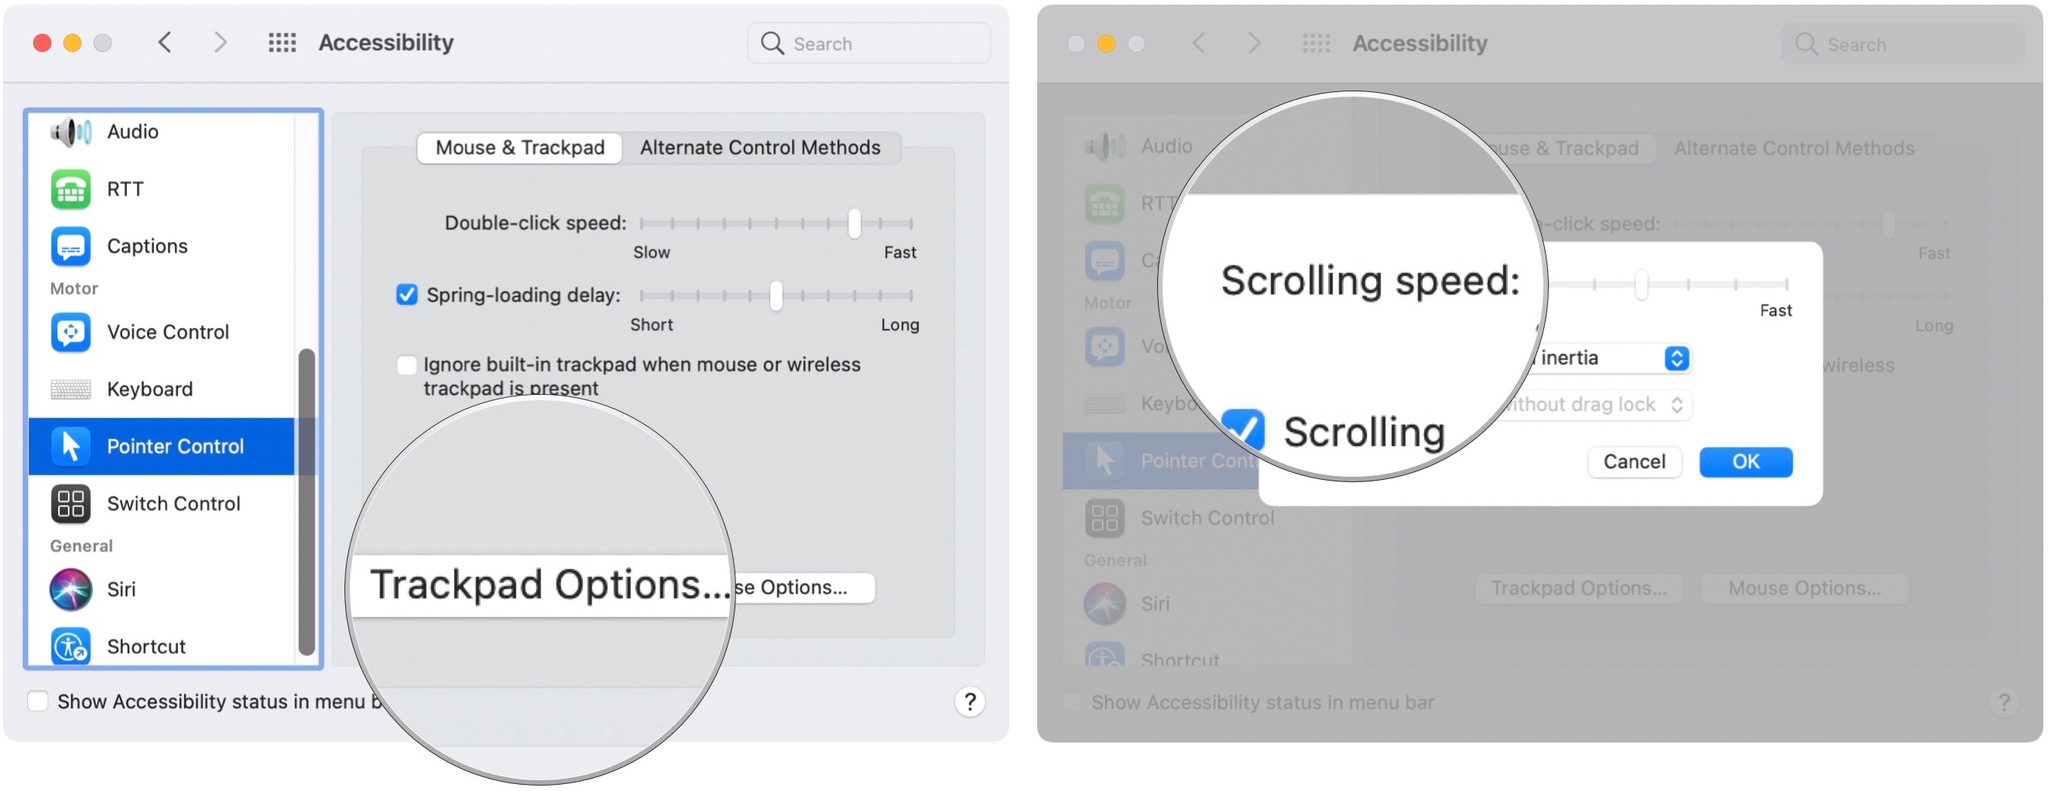 To speed up or slow down scrolling on a Mac trackpad, click on Trackpad Options. Then move the Scrolling speed slider.